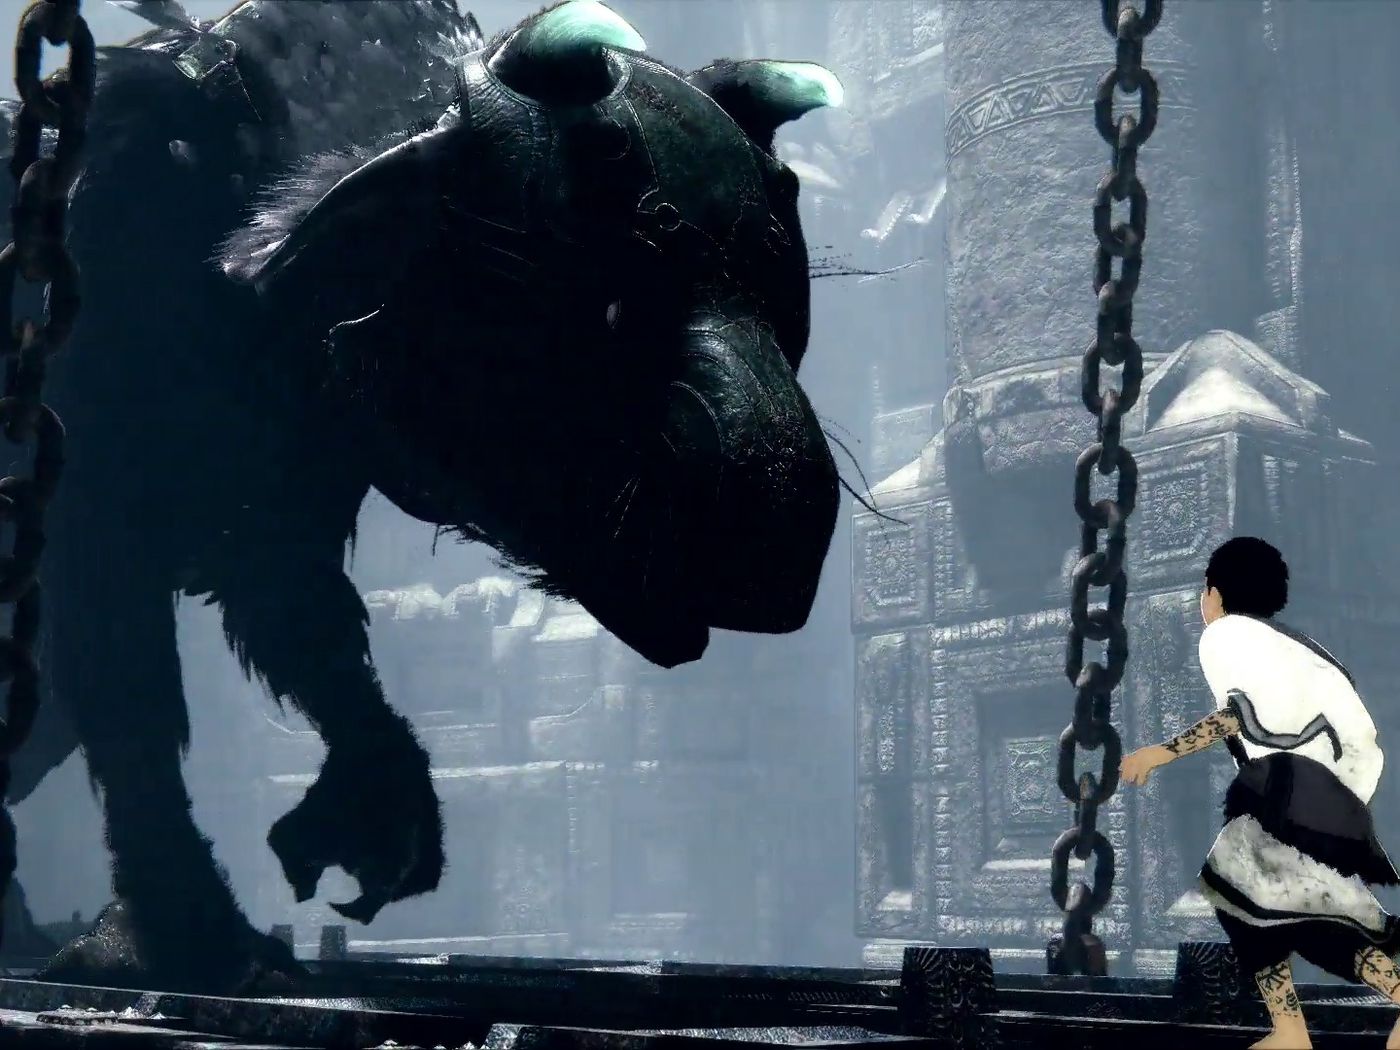 The Last Guardian Collector's Edition comes with premium statue, art book  and more - Polygon